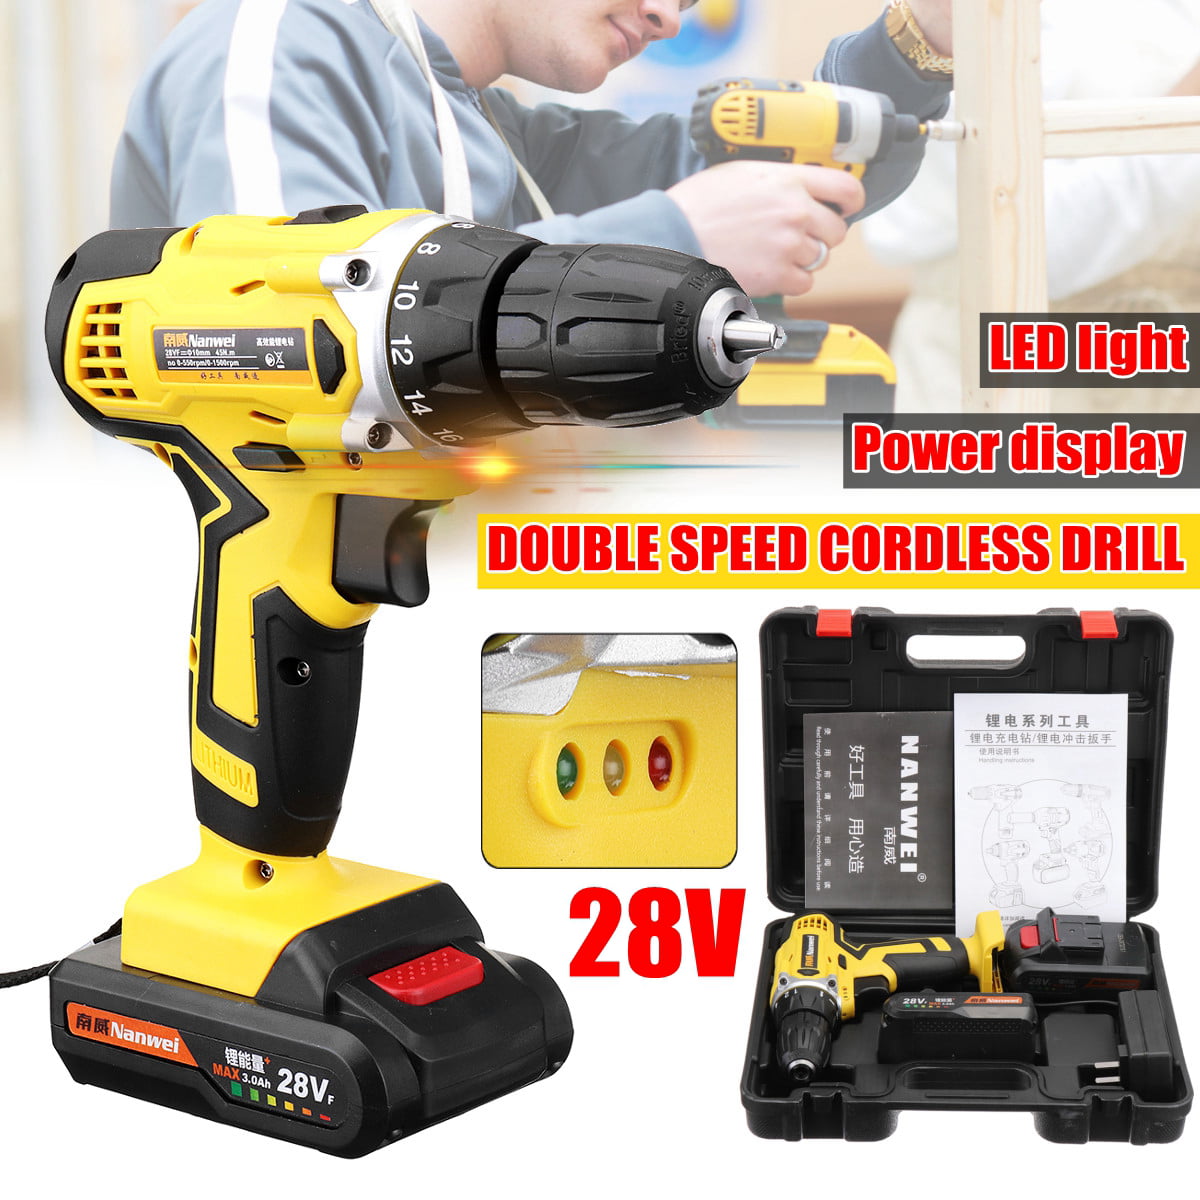 Screwdriver & Drill Bits Yel Multiple Sockets Magnetic Tip Holder & Flexible Shaft URCERI 14.4V Cordless Electric Drill Kit 2000 mAh Lithium-ion Battery 18+1 Keyless Clutch 2-Speed Driver with LED